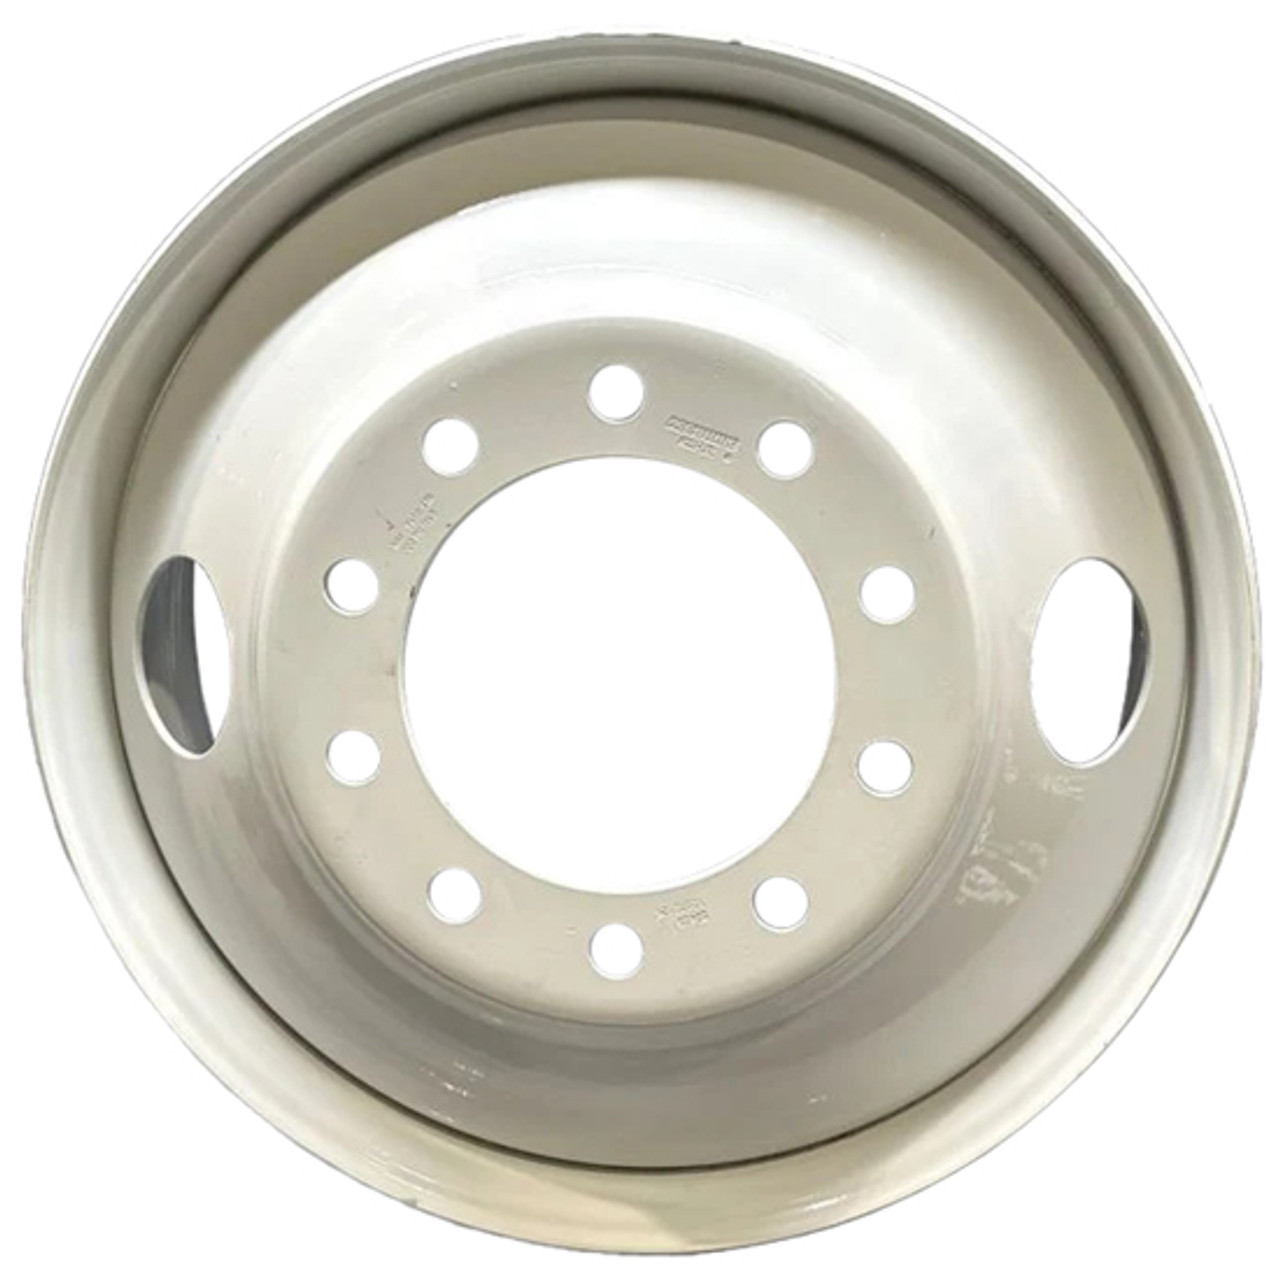 Accuride® 24.5 x 8.25 Ultra Polished